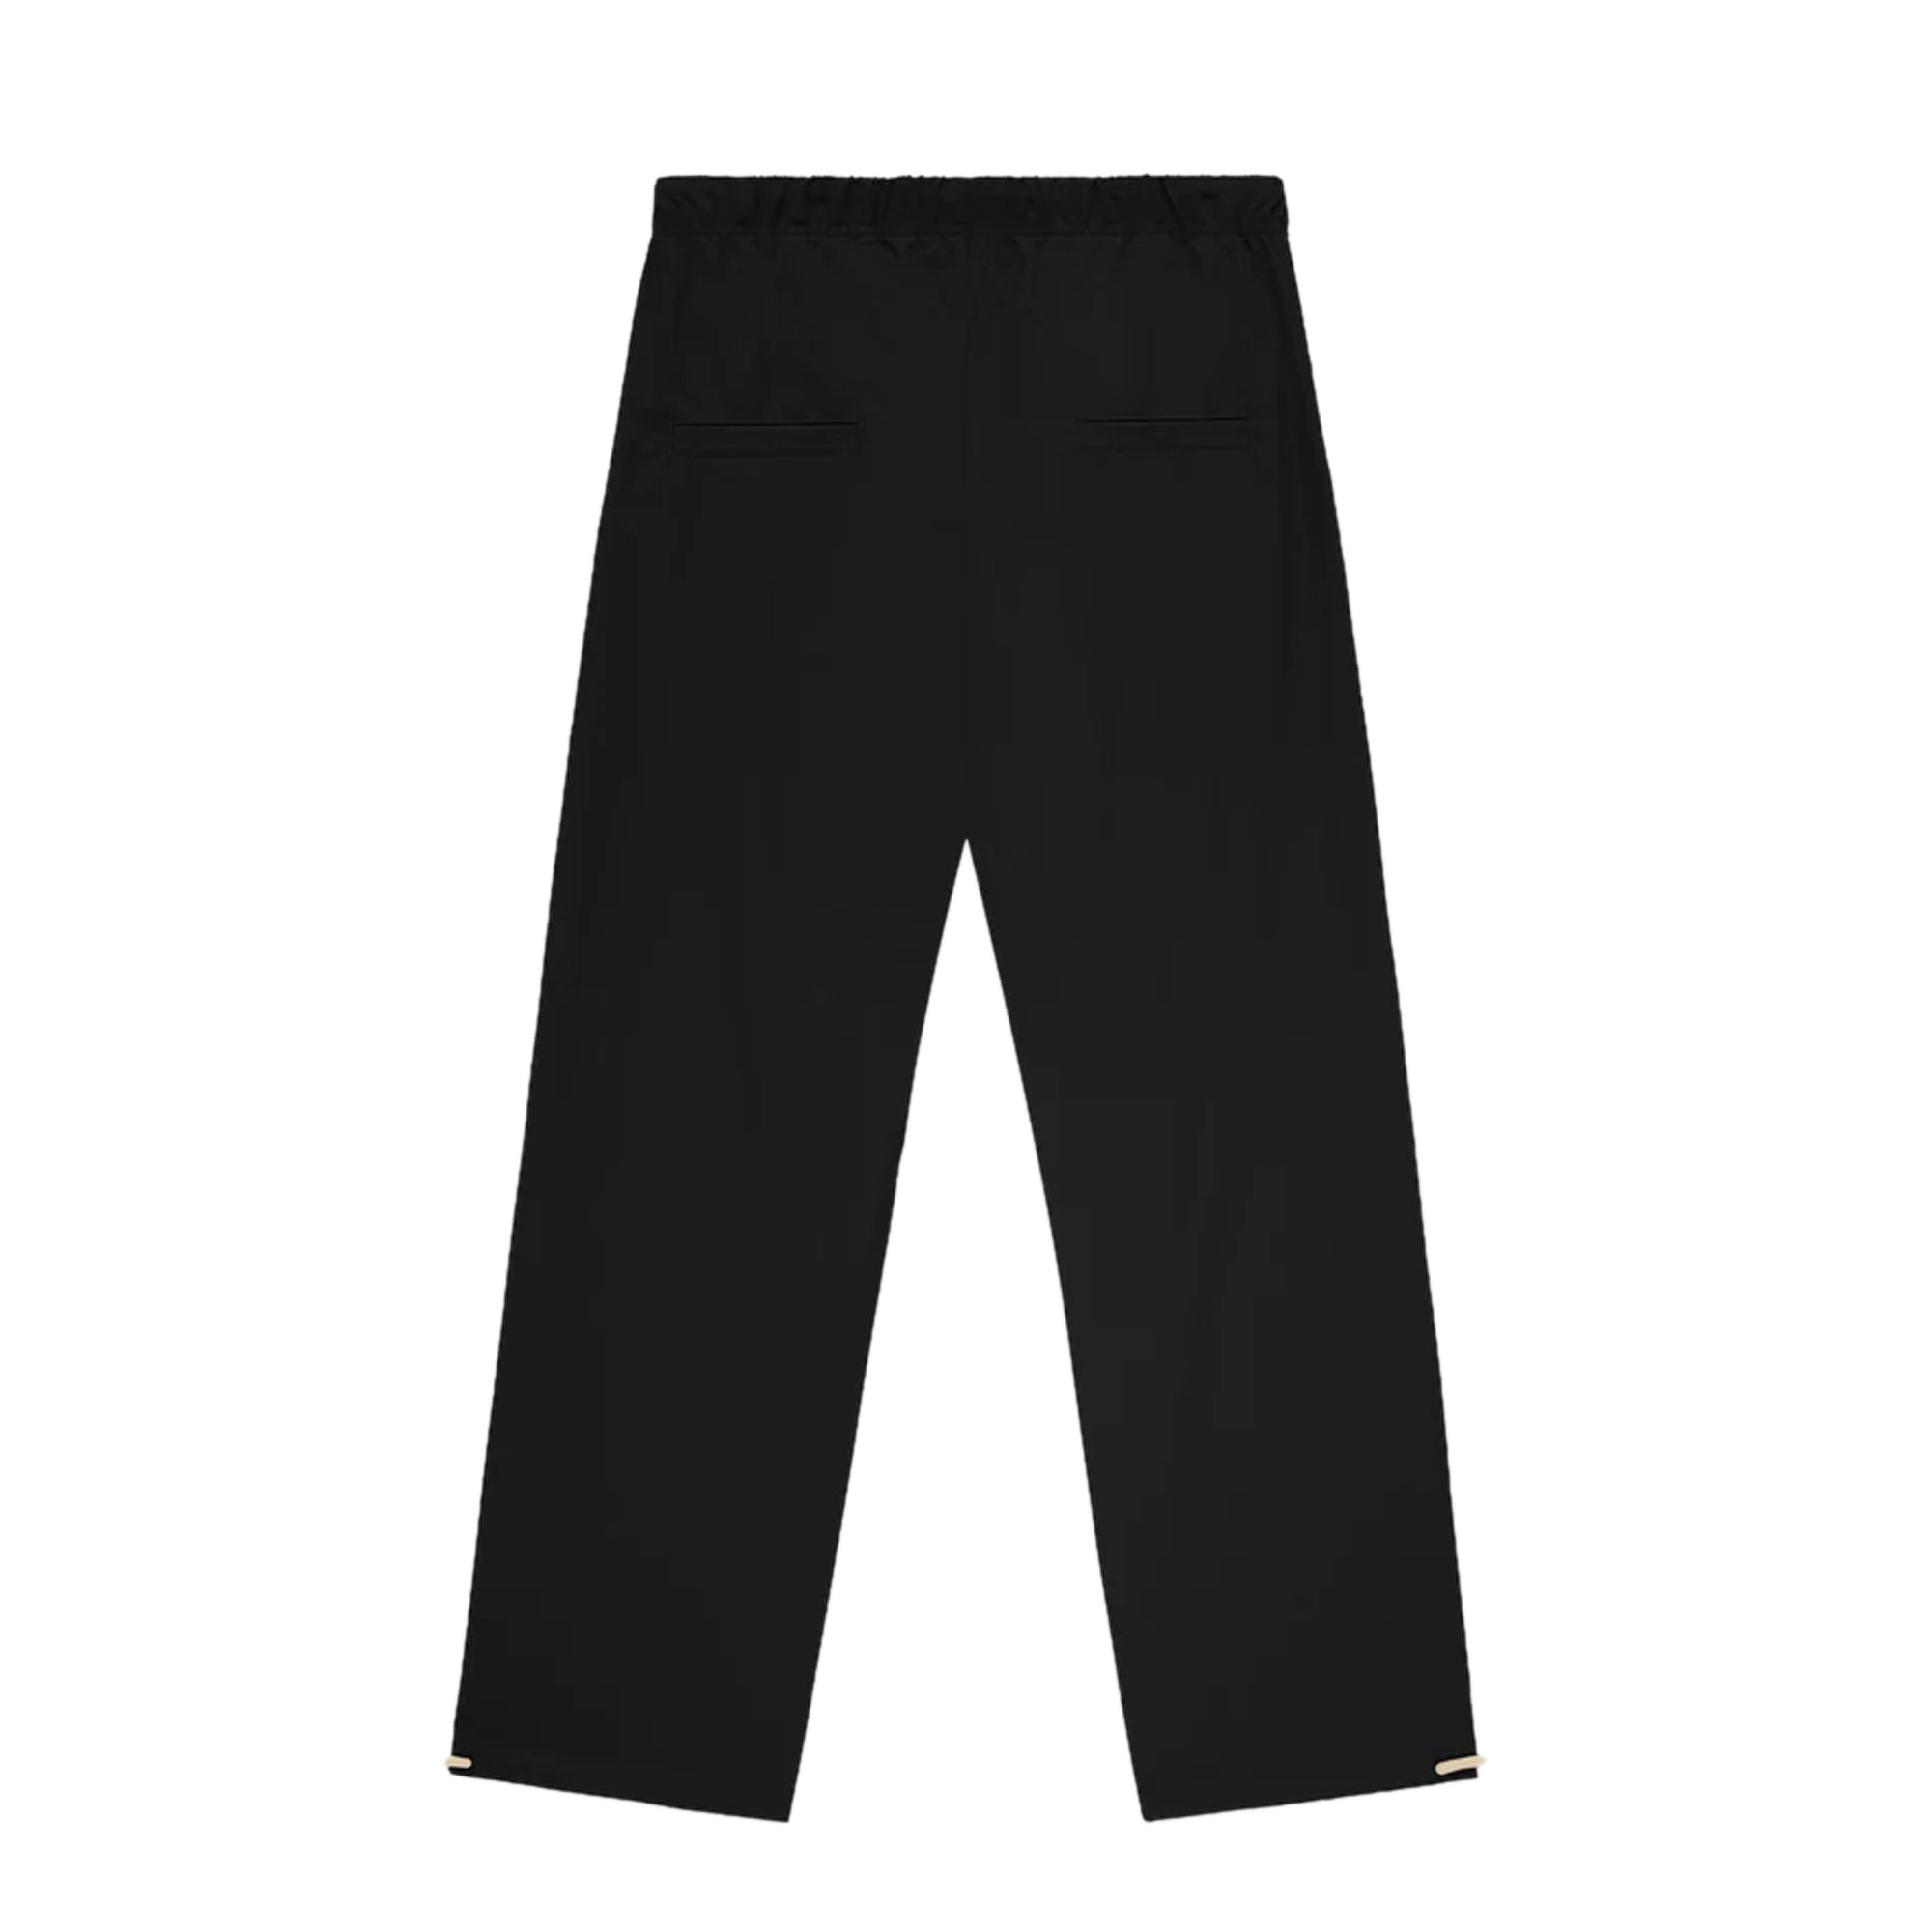 Buy Dobby Formal Trousers Online at Best Price in India - Suvidha Stores